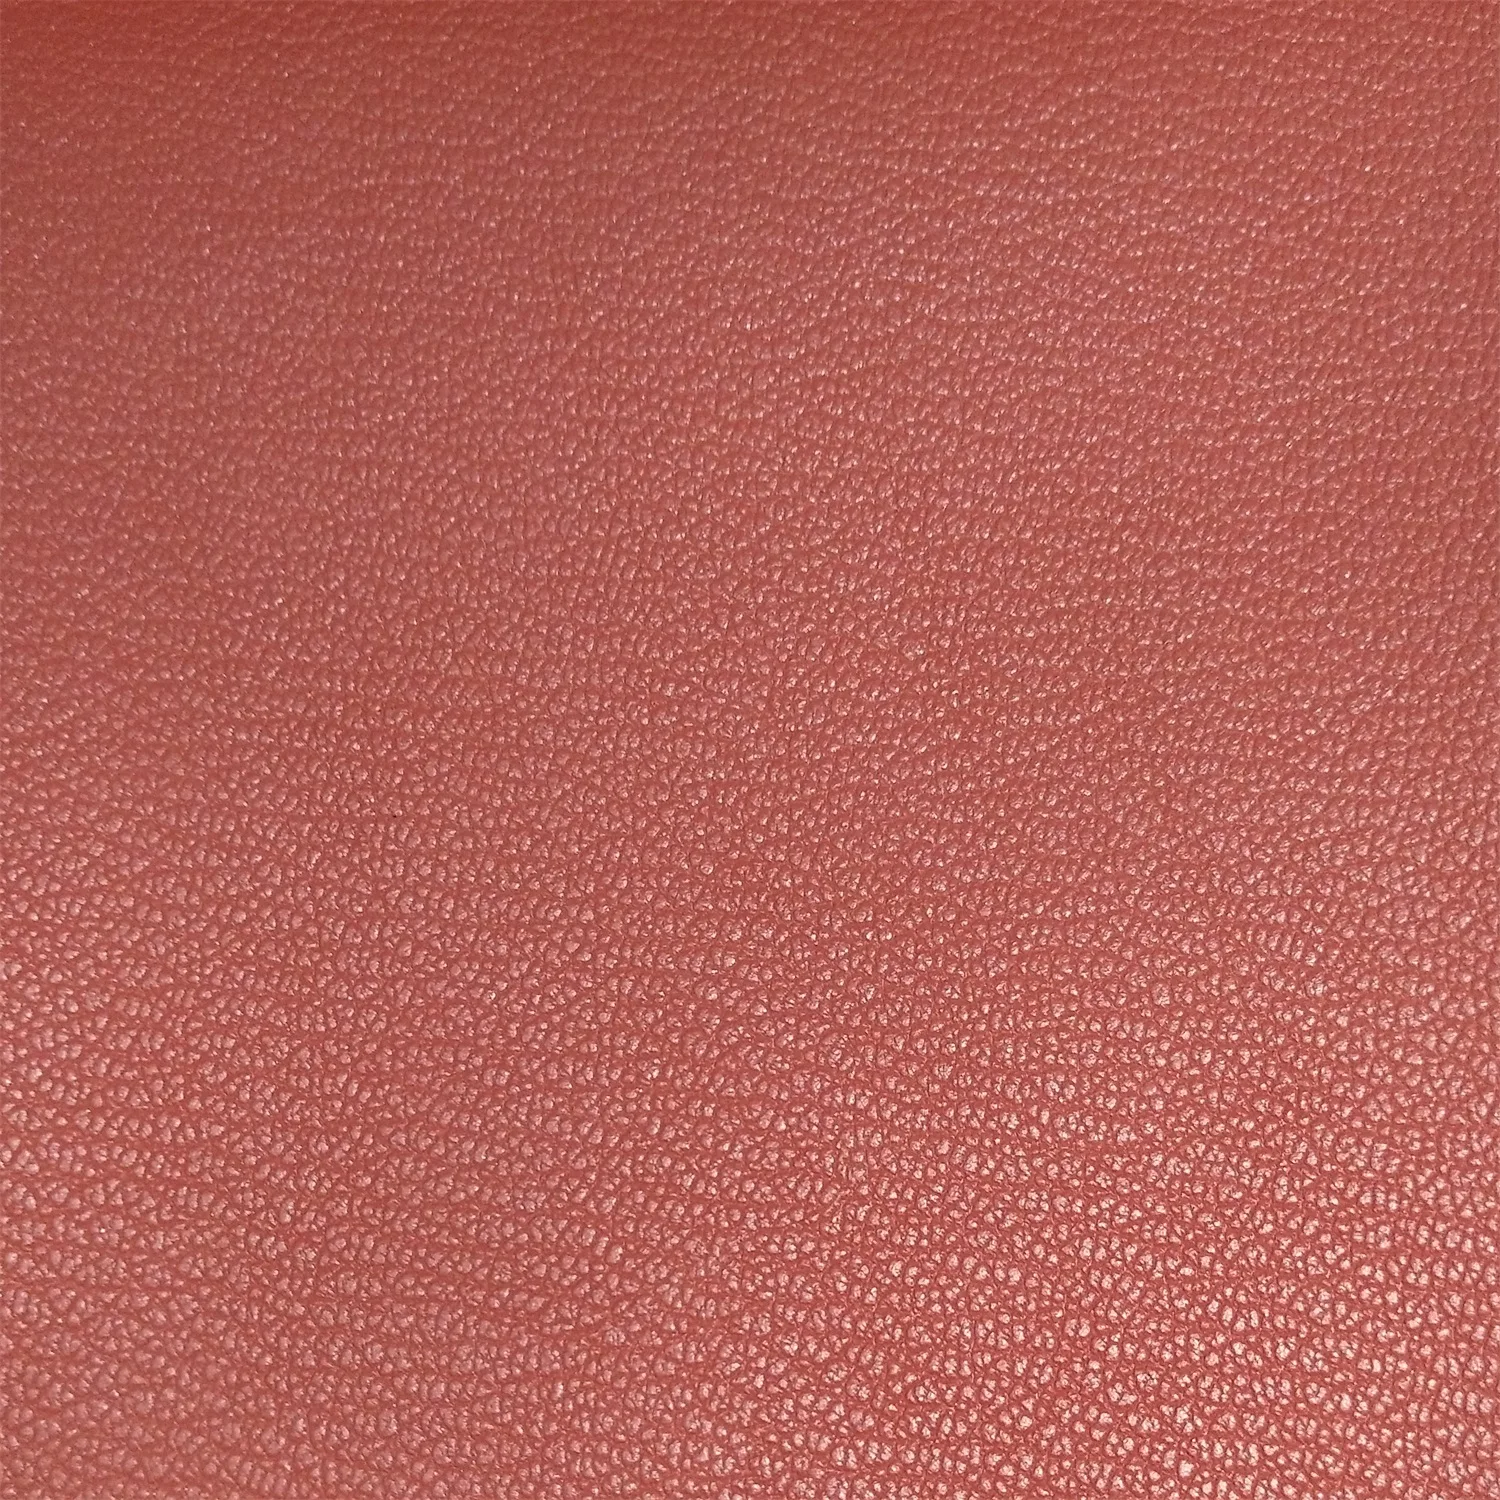 
Animal Skin 1.4mm Real Leather Synthetic Faux Genuine Red Litchi Grain Shoes Bag Leather 